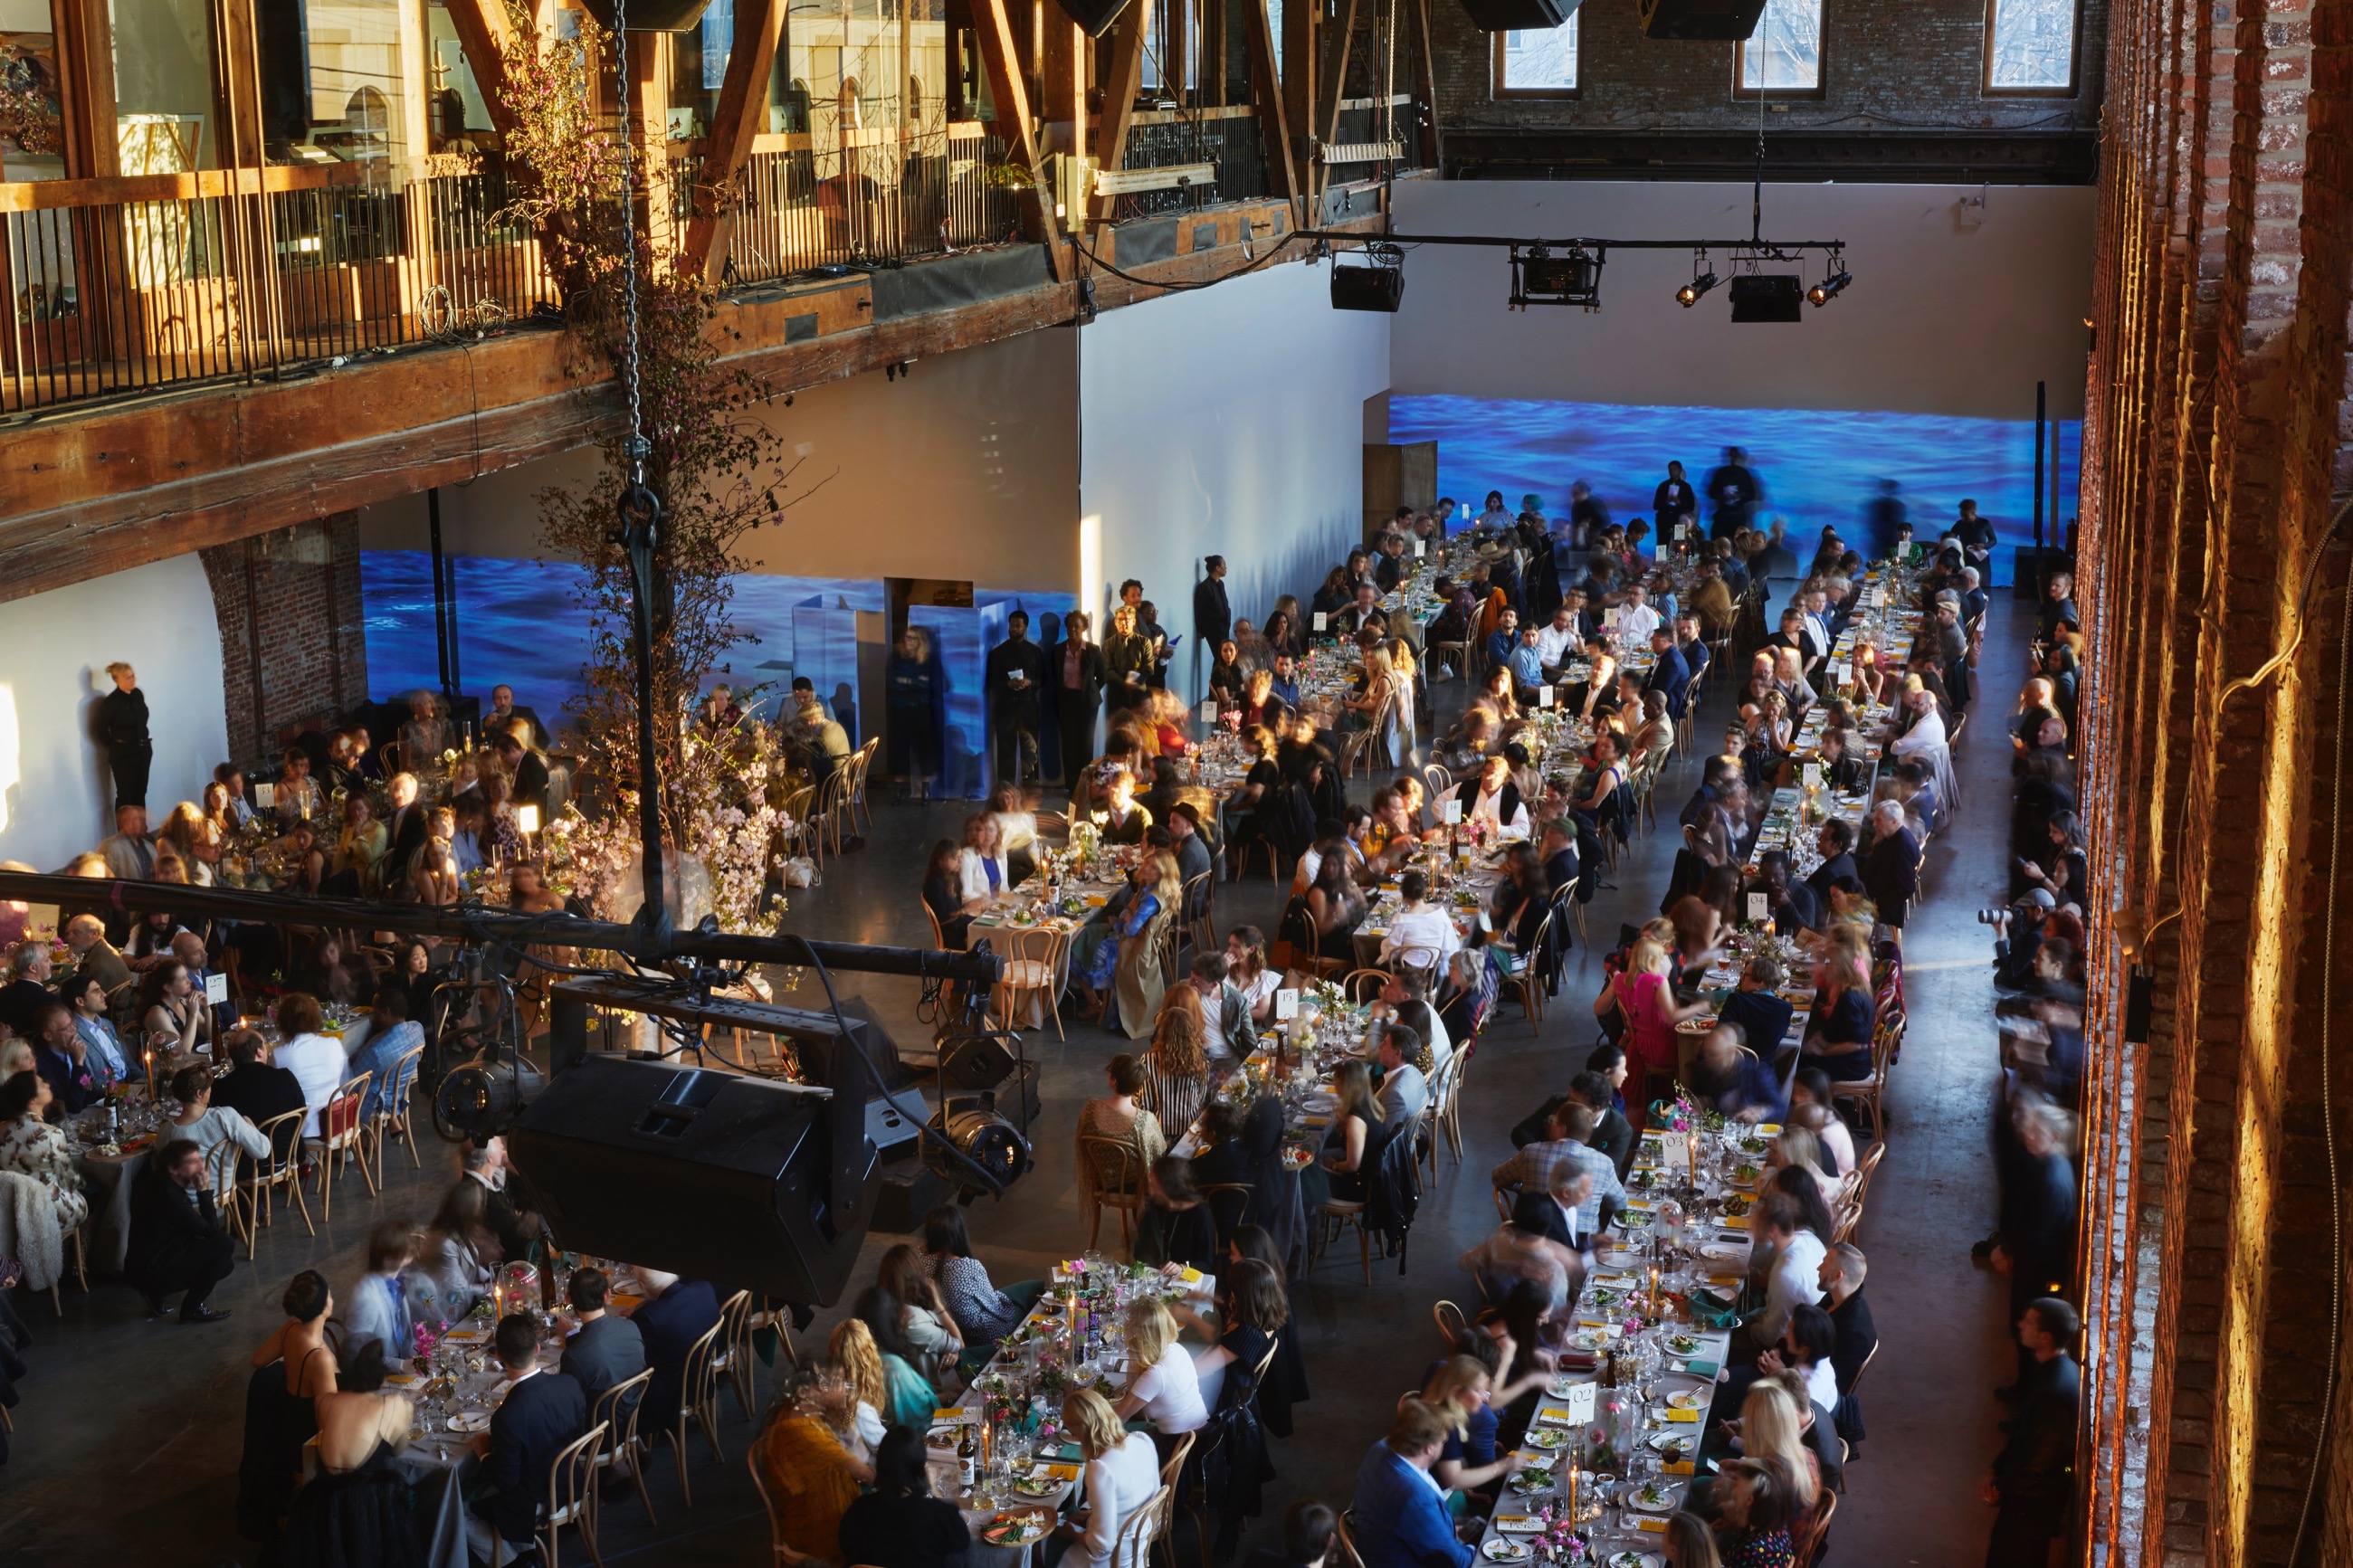 Overhead shot of a gala event—dozens of elegently decorated tables with white table cloths and well-dressed people sitting at them. Behind them, on a long white wall, a video of a body of water is projected